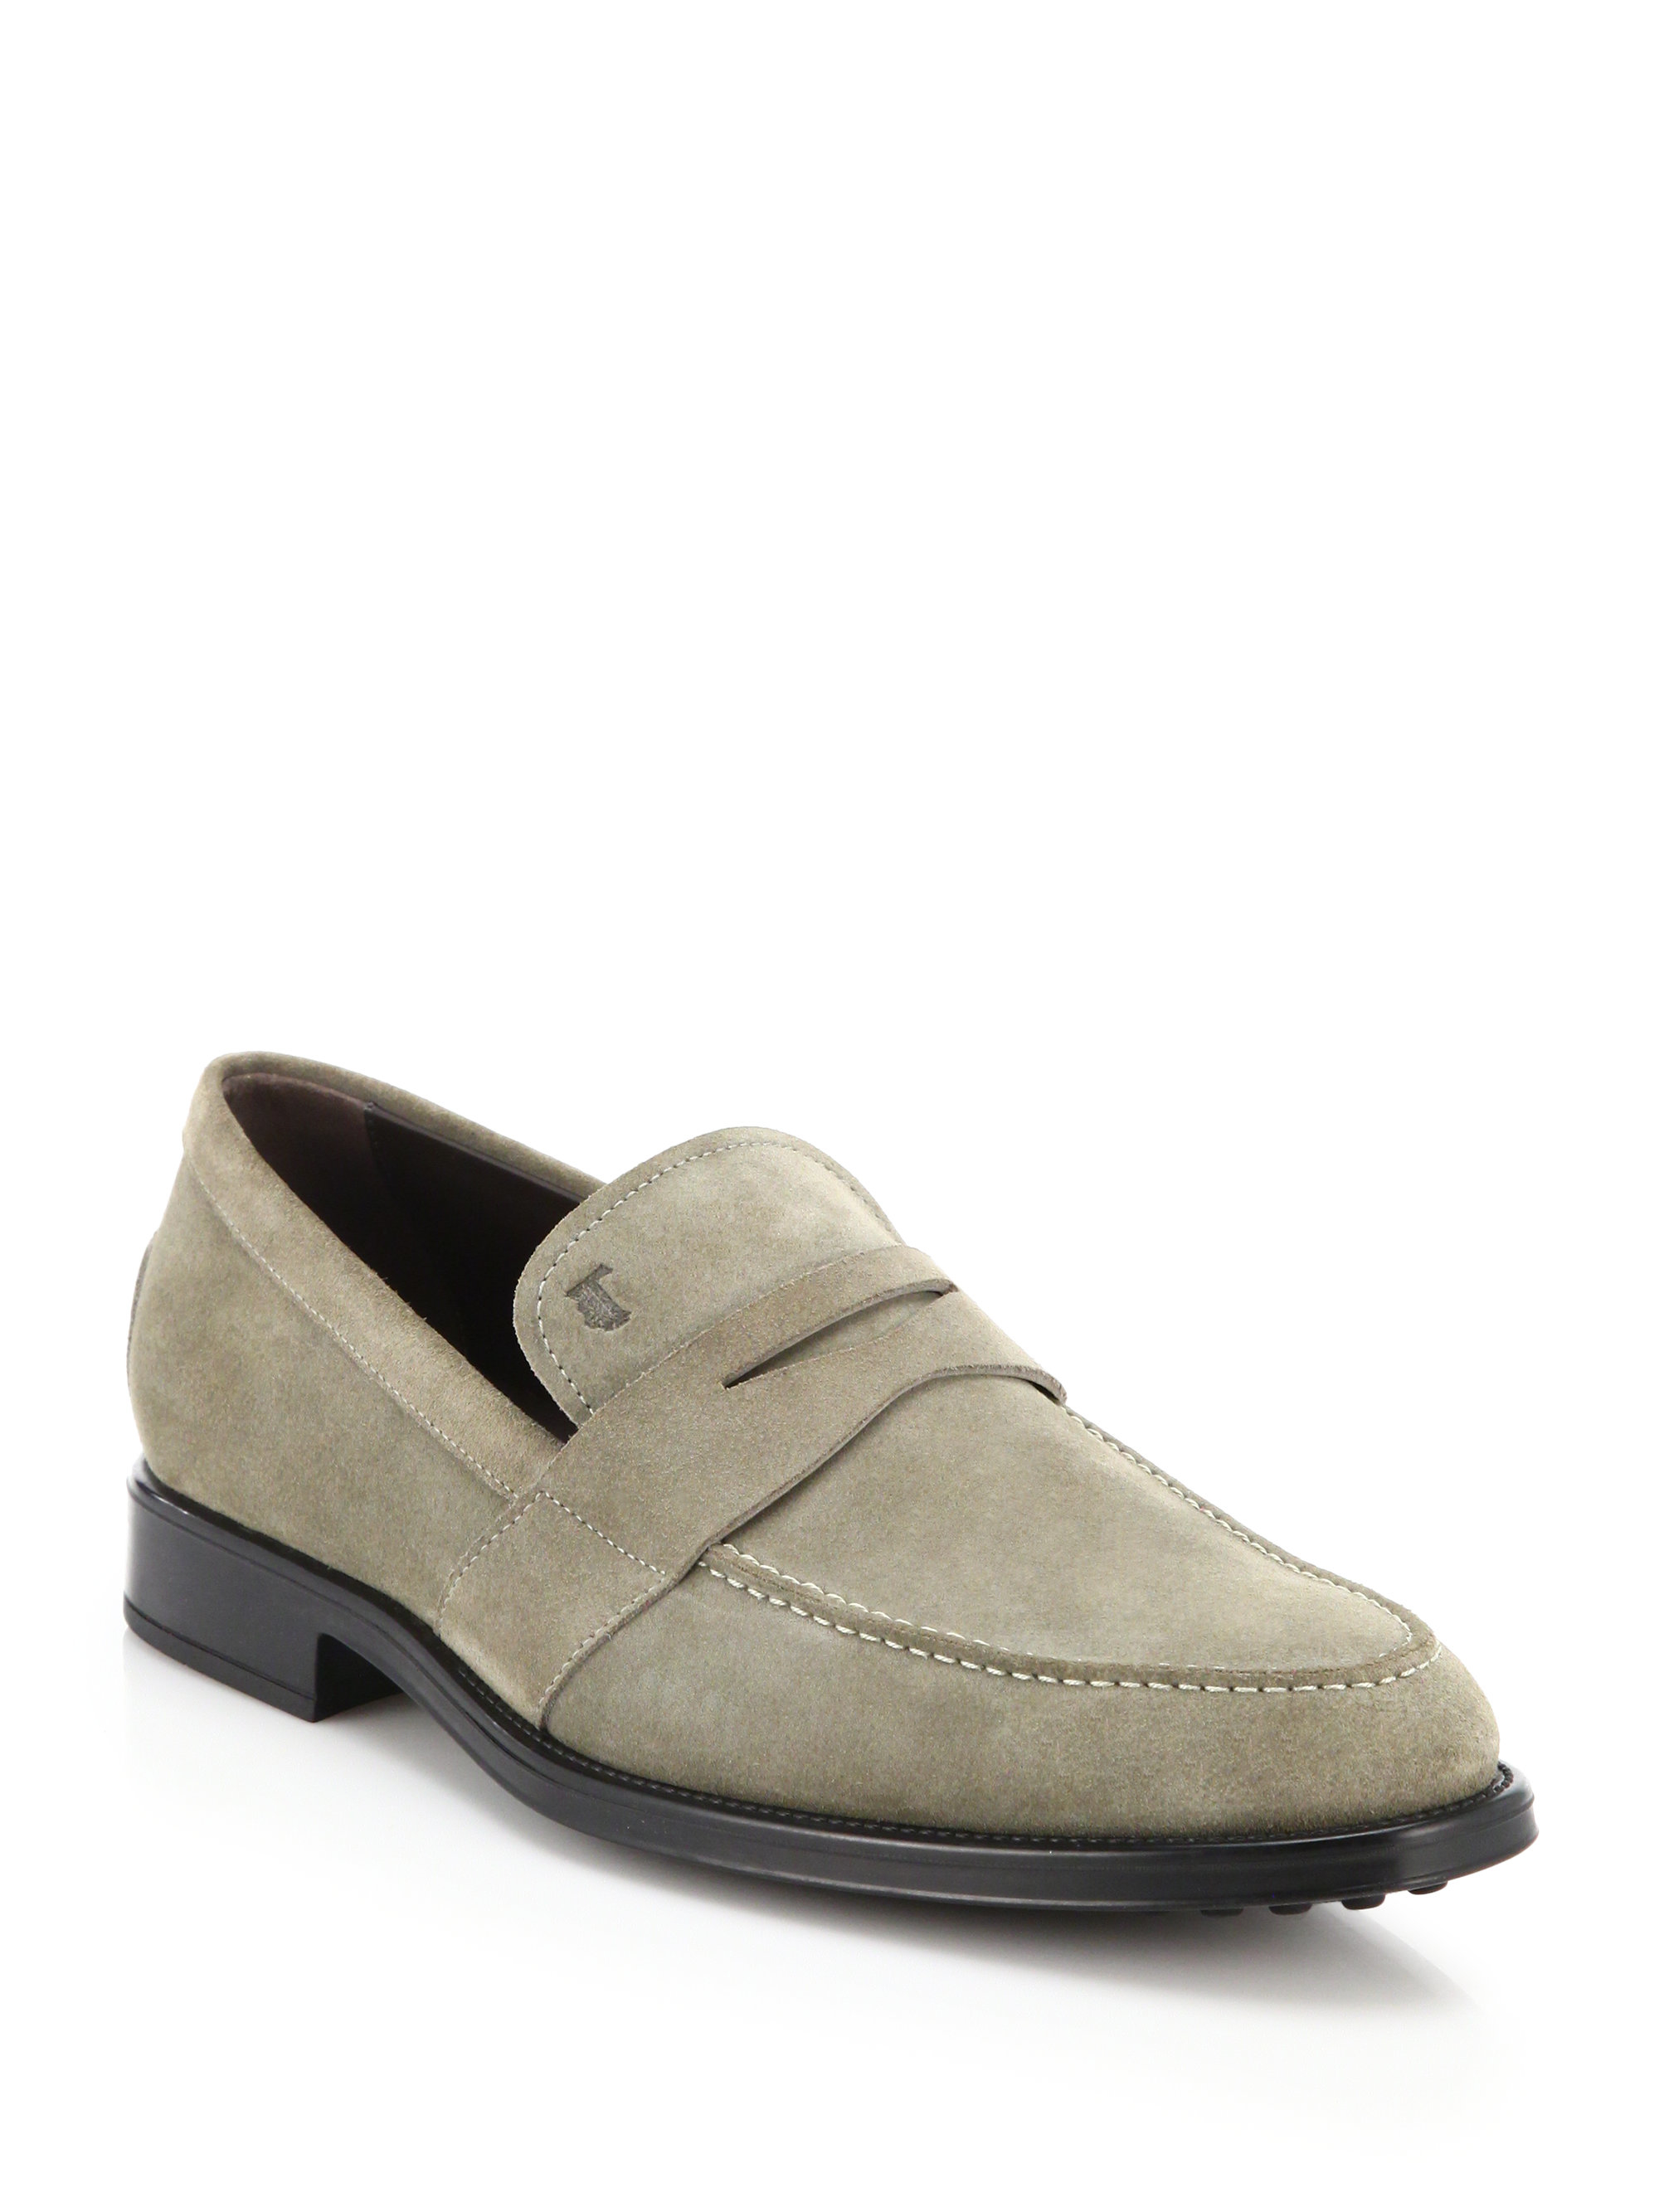 Tod's Suede Penny Loafers in Dark Beige (Natural) for Men - Lyst